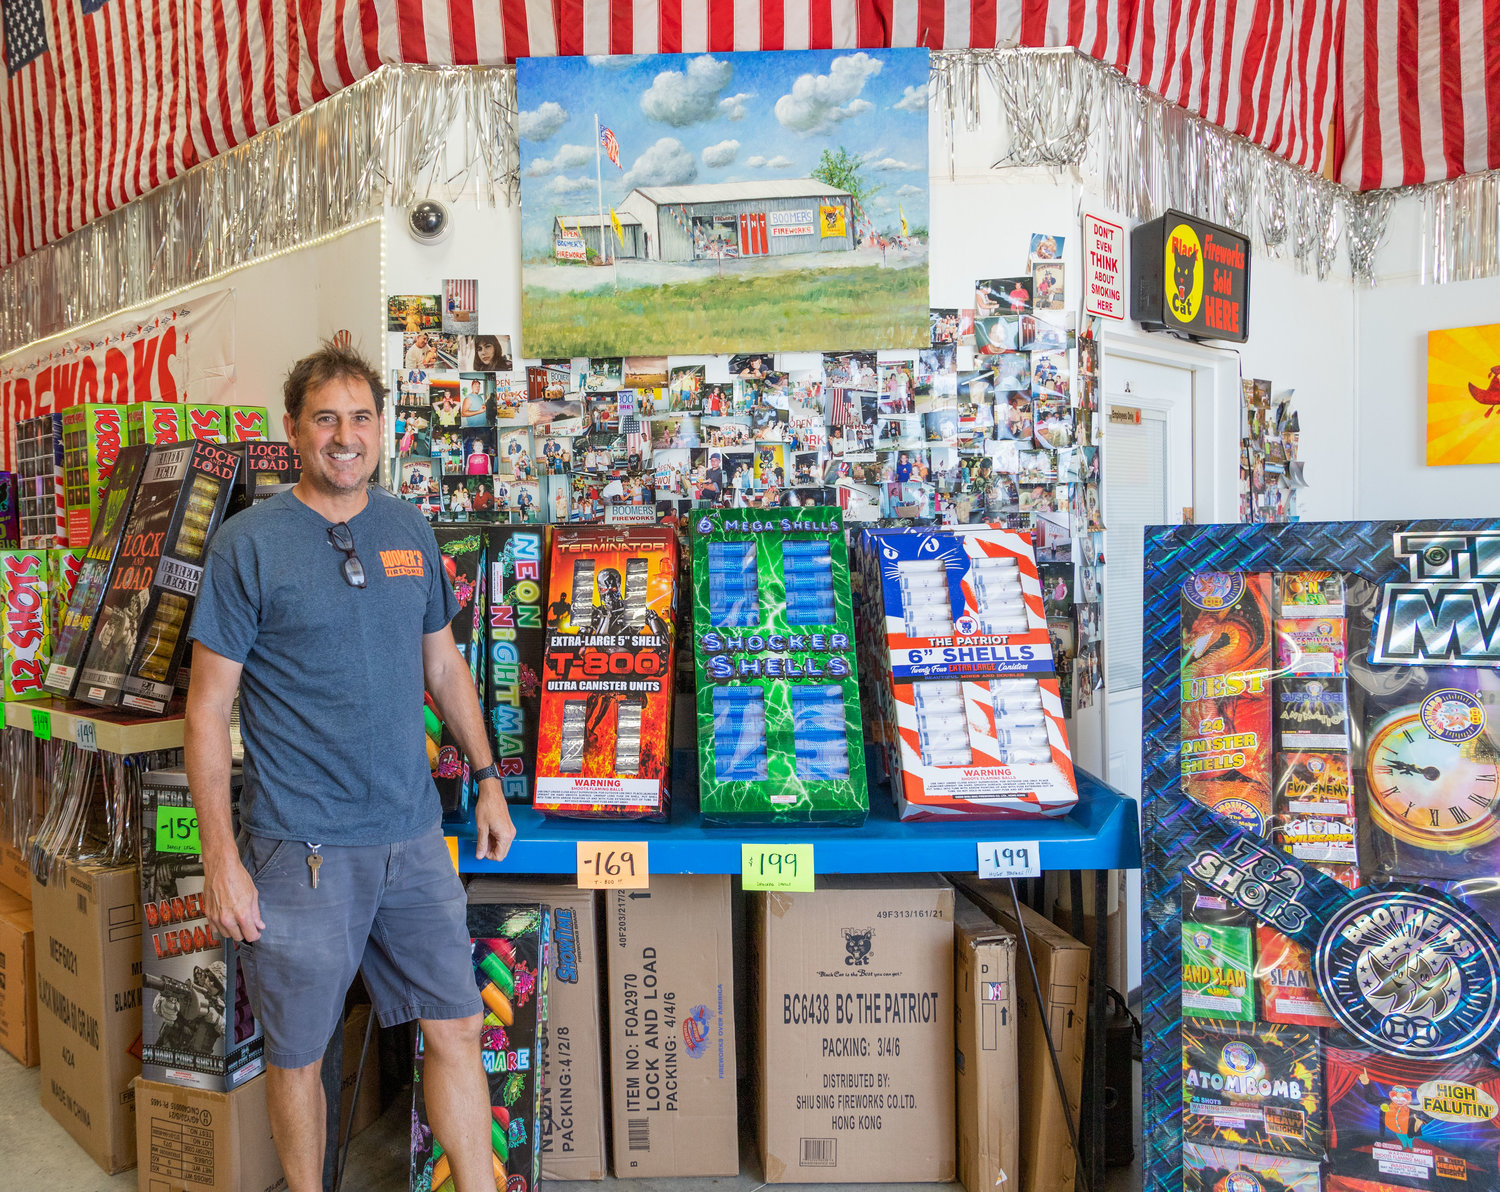 Jon Wolf shows off the photos of customers who have patronized Boomer’s Fireworks in the past 33 years. Many now have children and grandchildren who buy their fireworks from the Wolf family.